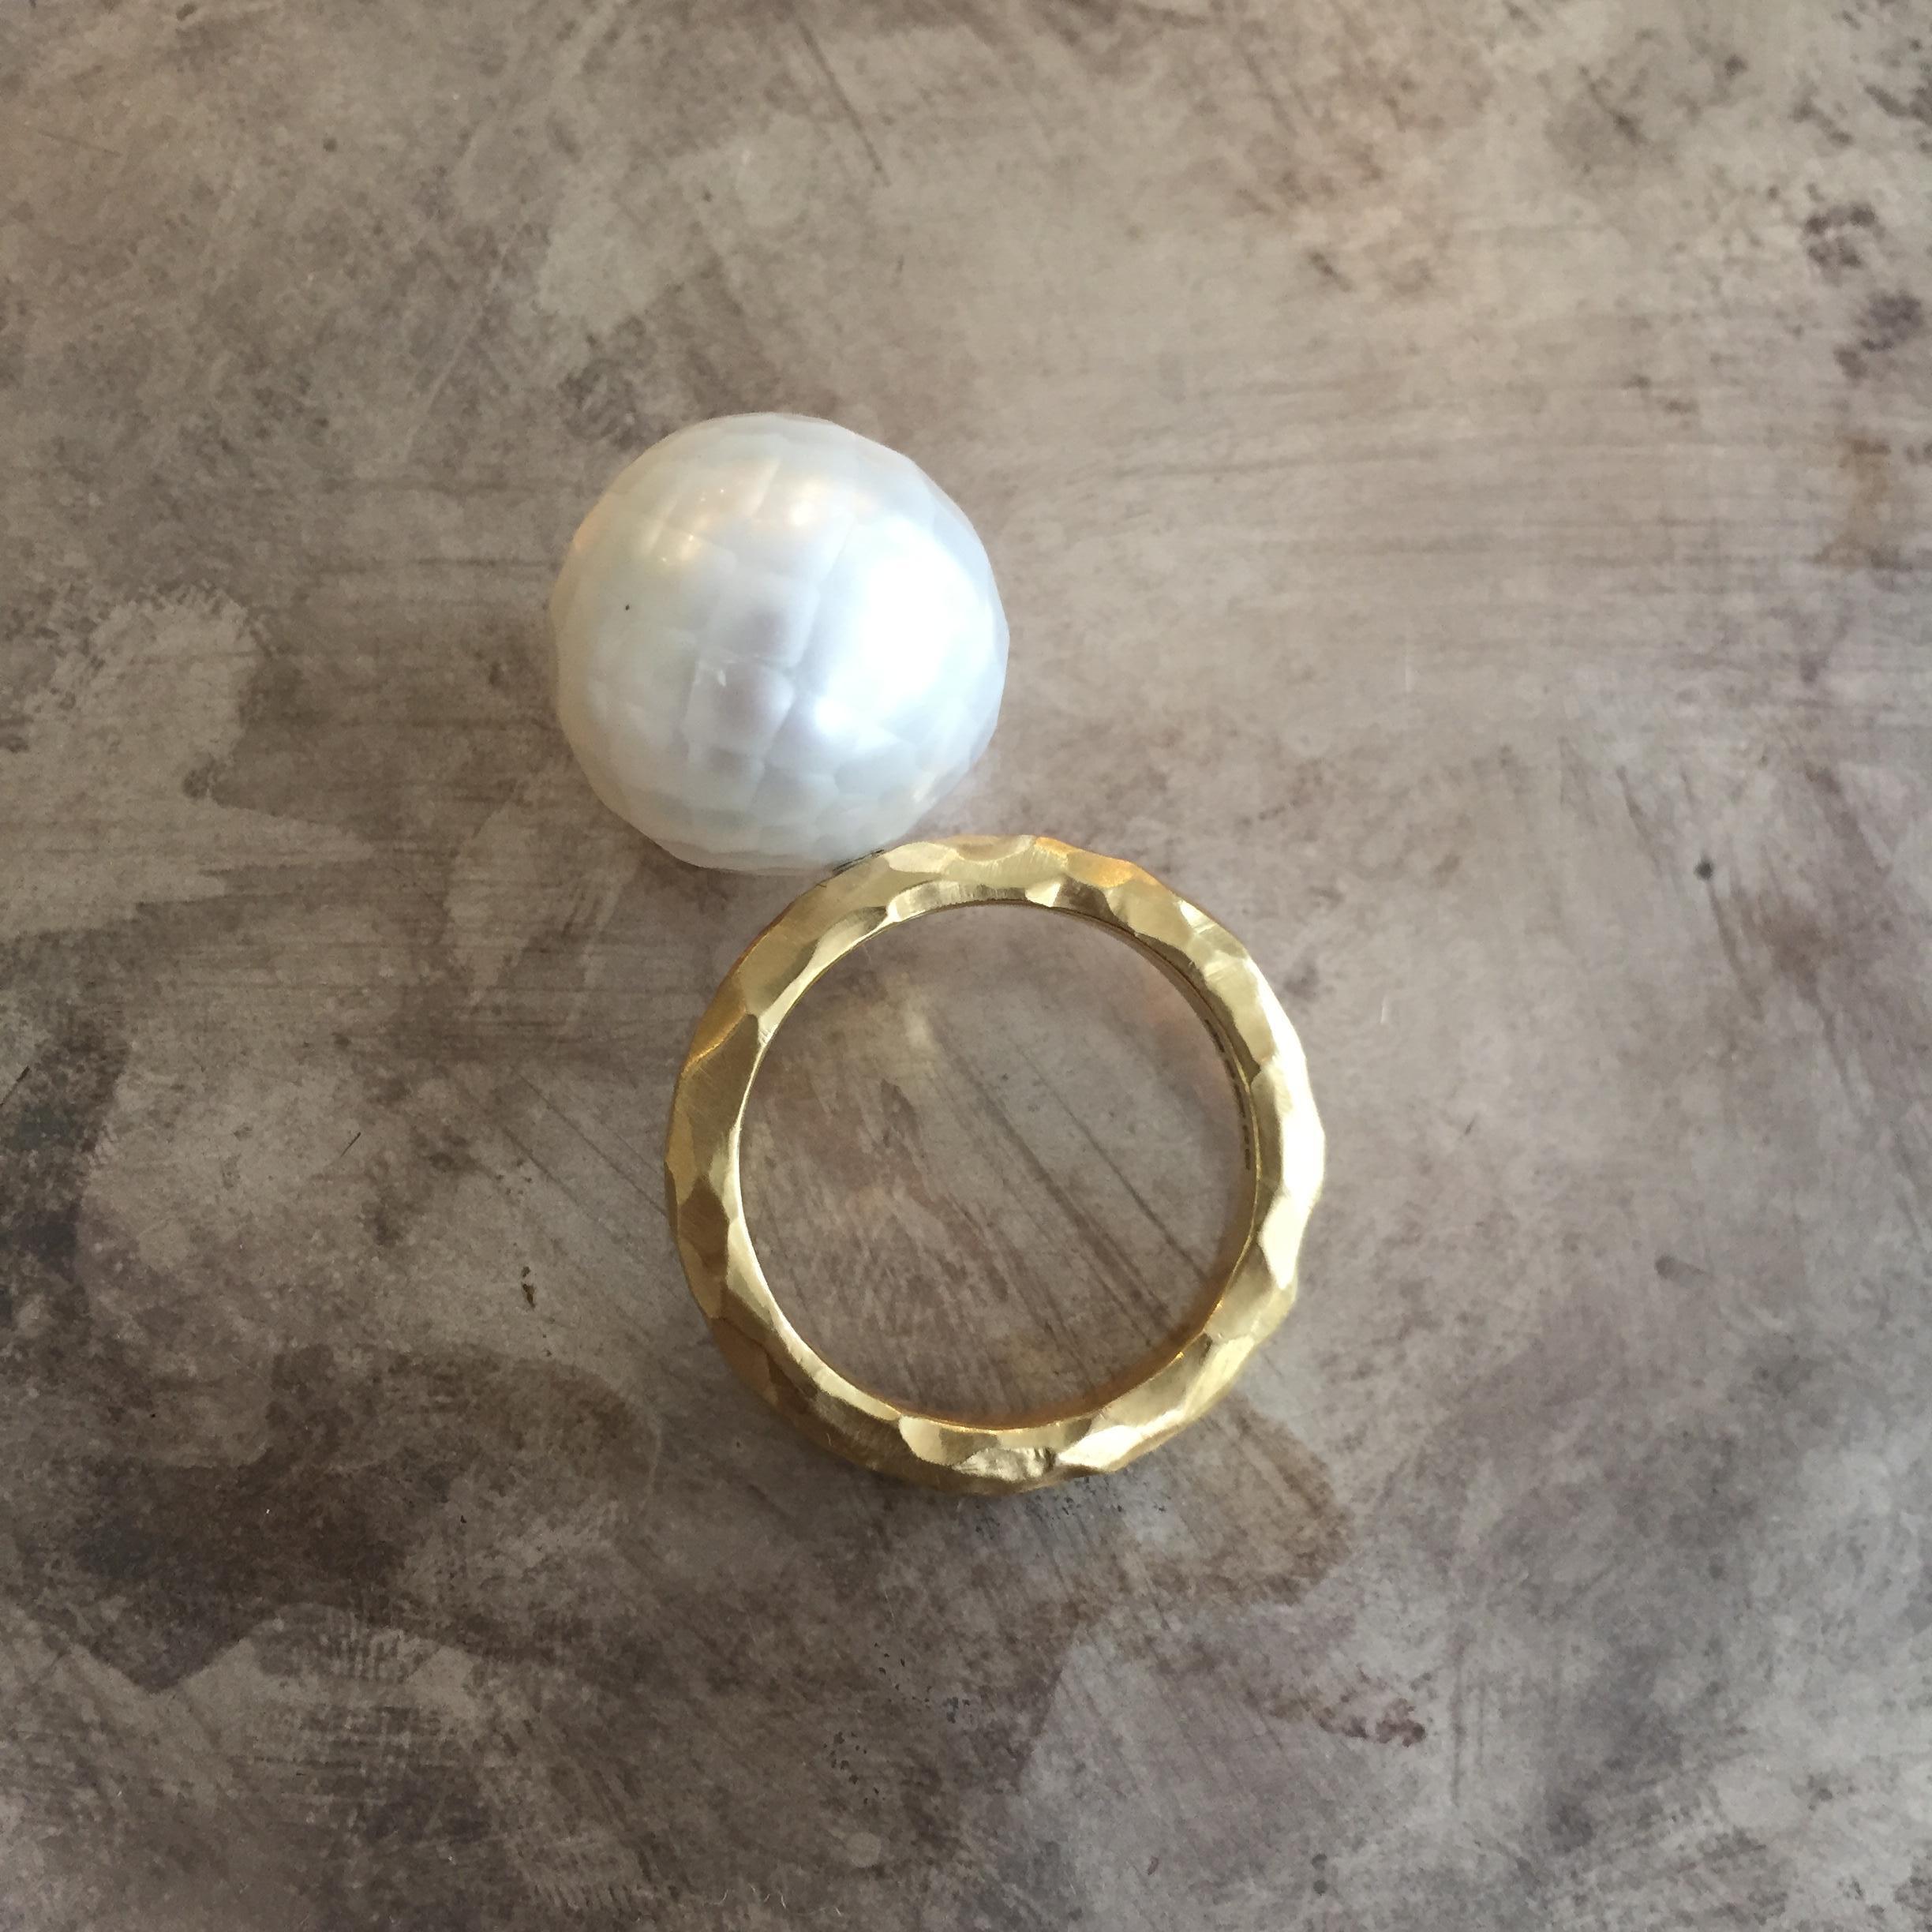 This stunning ring from Sweet Pea features an 18k yellow gold hammered 3mm wide band with a brushed finish. The faceted white South Sea pearl is 15mm in diameter and completely unique. This one-off ring is a UK size M.